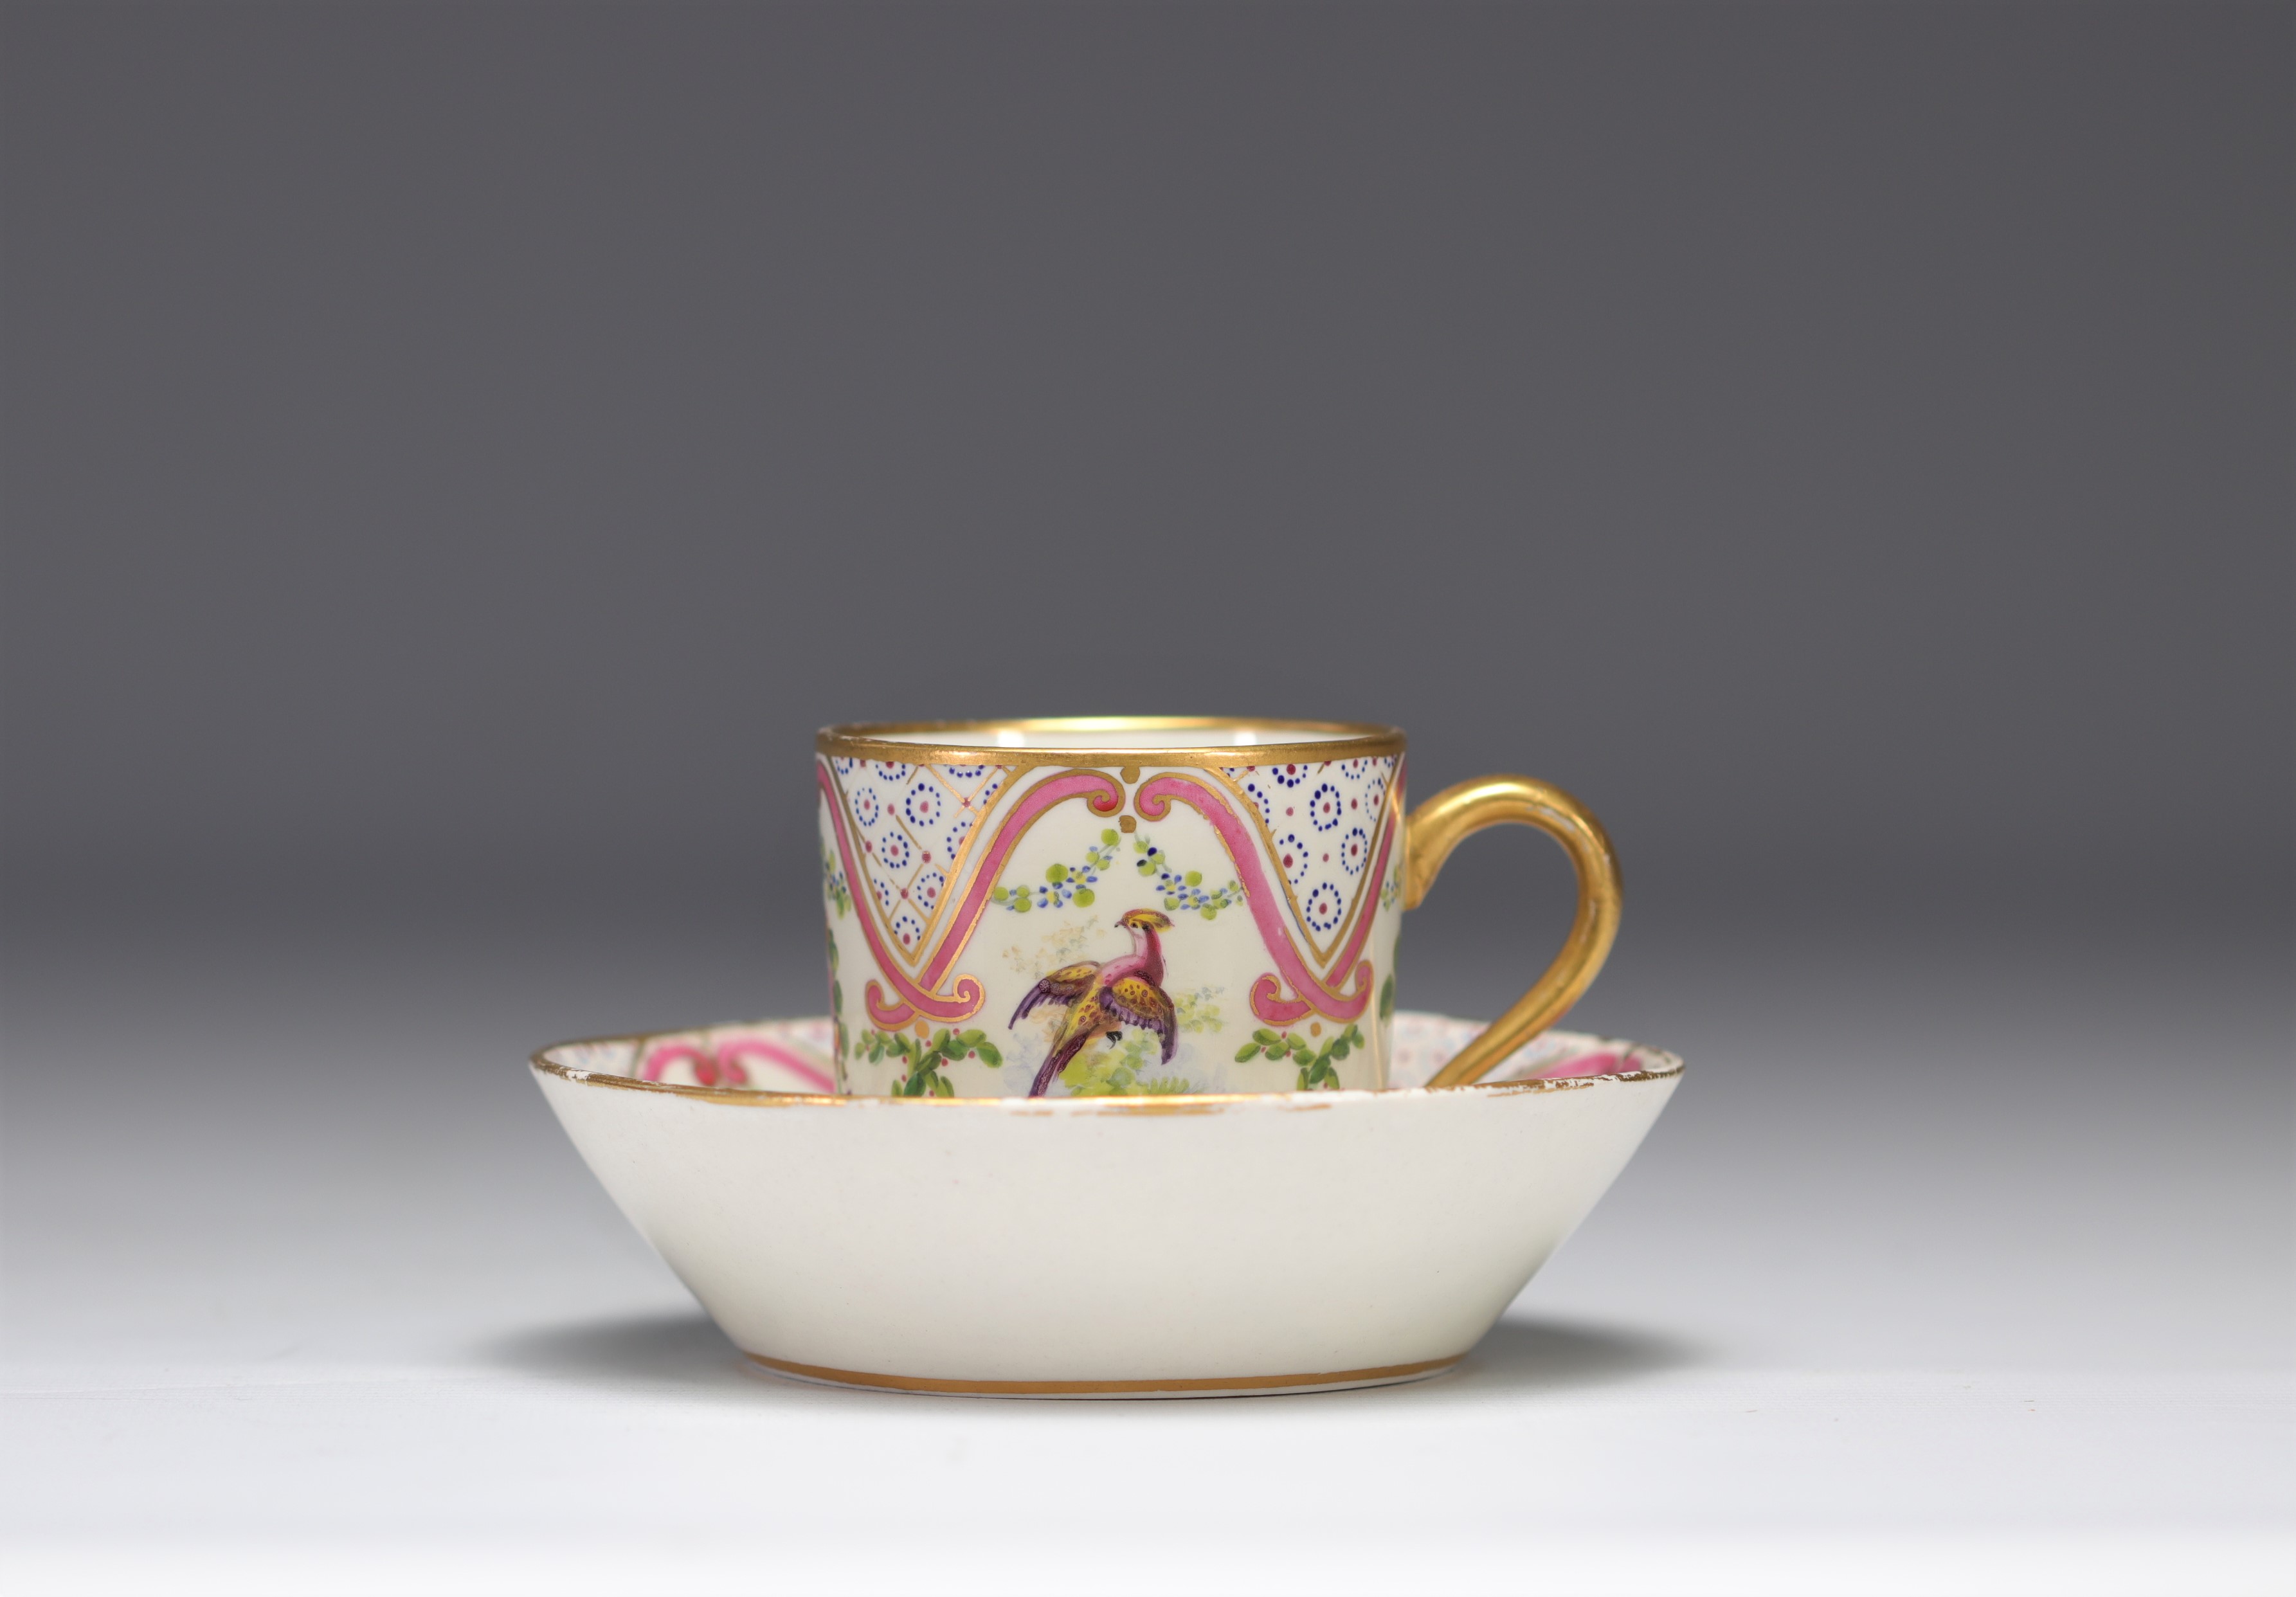 Porcelain "cup and saucer" decorated with birds and flowers from Tournai (Belgium) from 18th century - Image 2 of 7